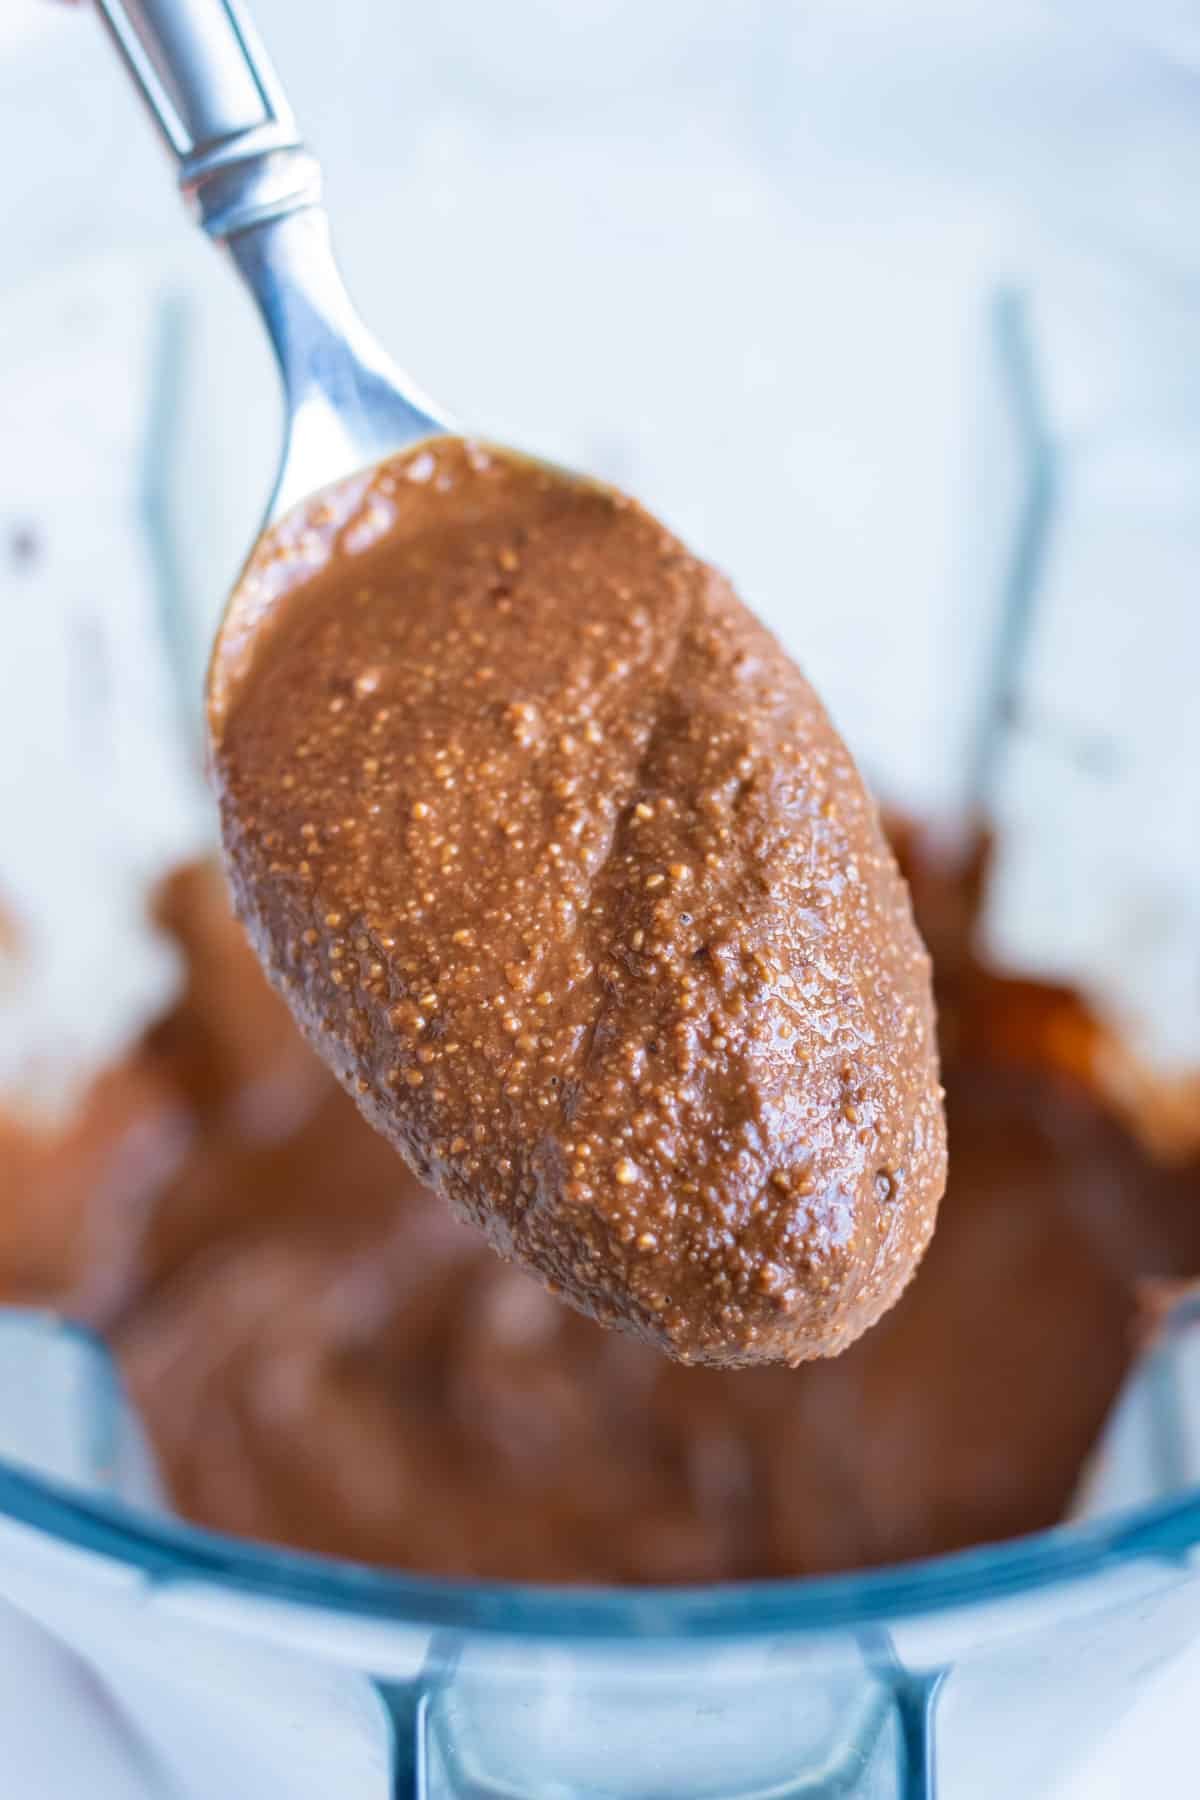 A spoonful of homemade Nutella.